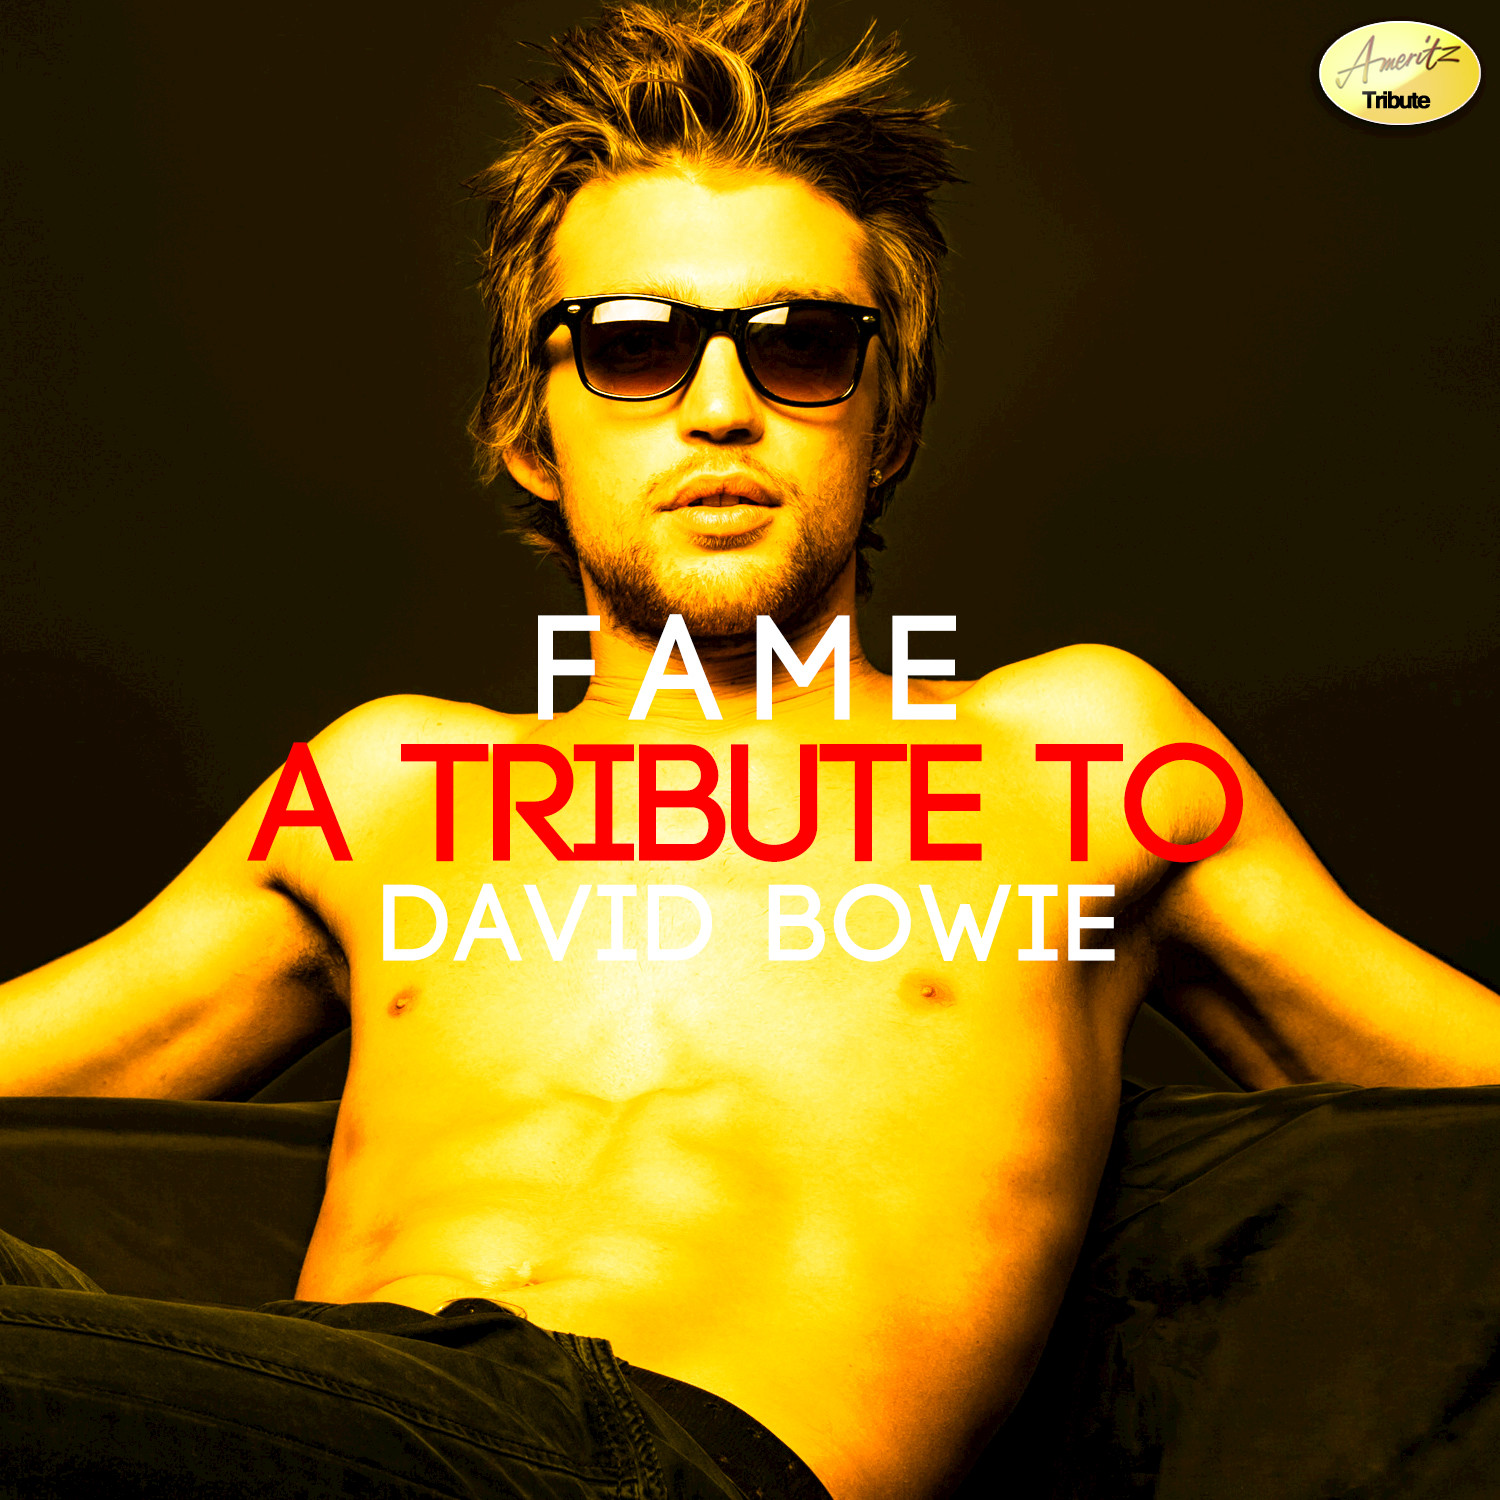 Fame (A Tribute to David Bowie)